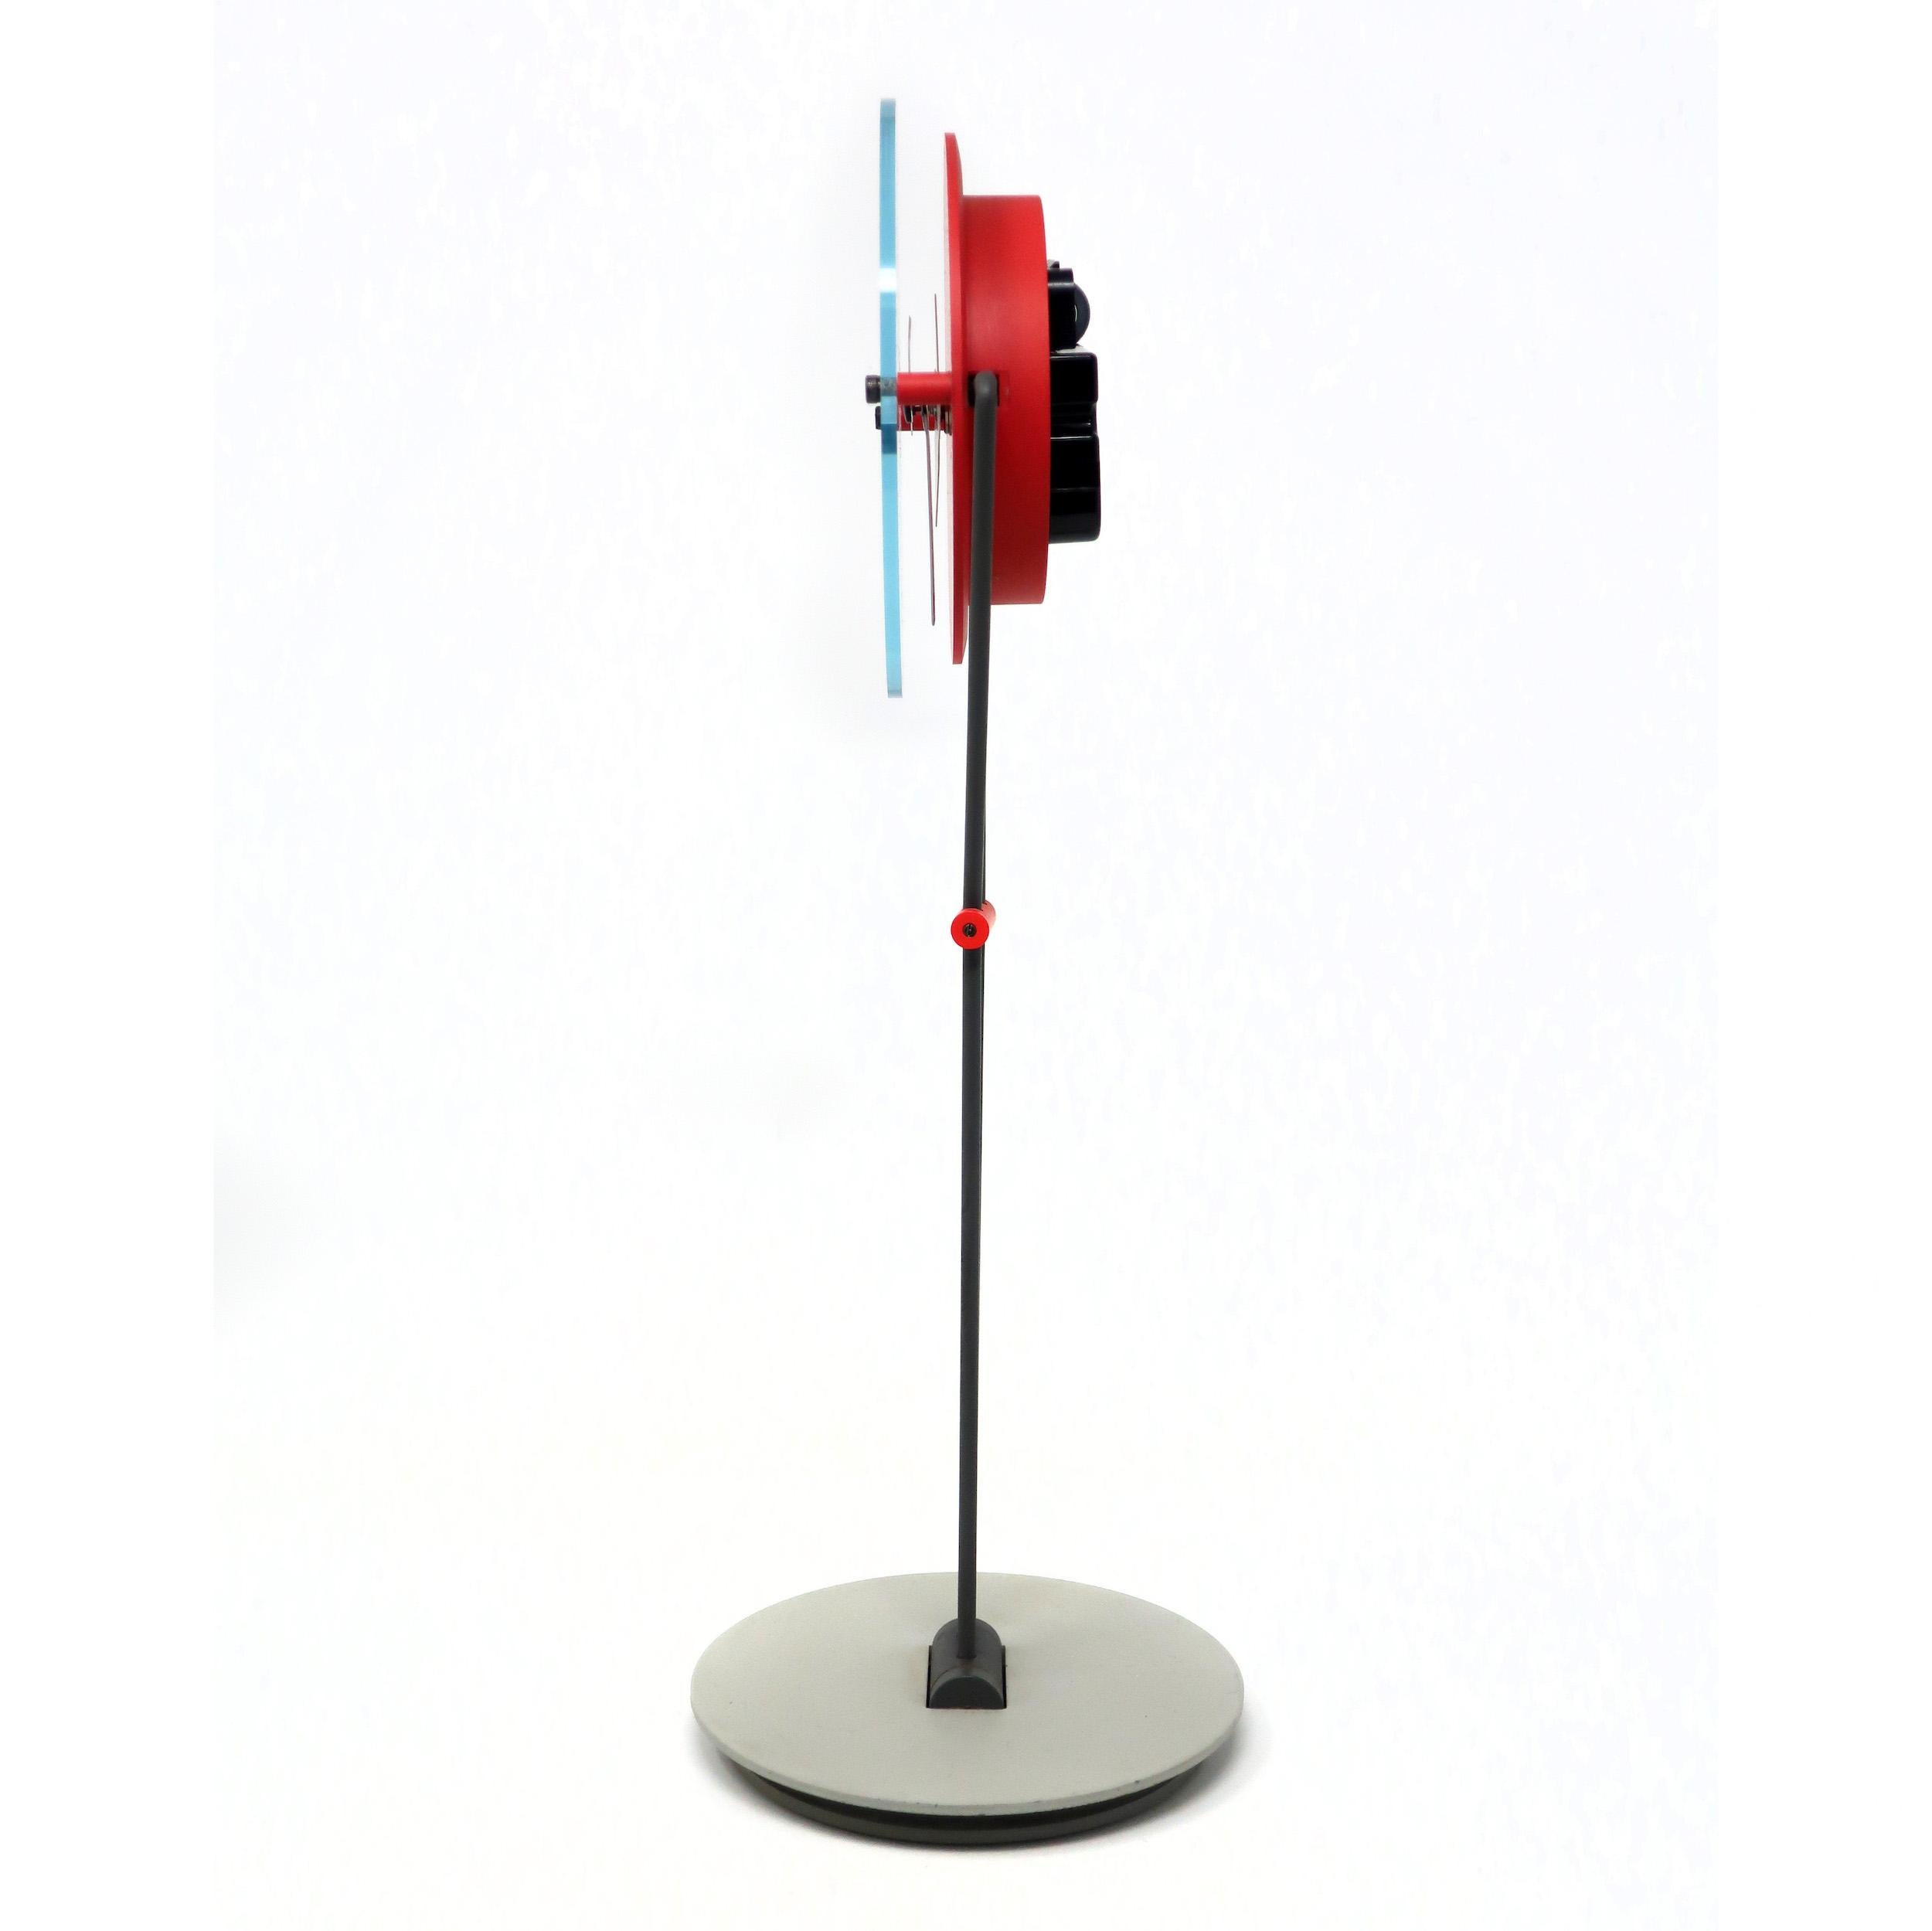 Post-Modern Vintage ARTime Collection Desk Clock by Canetti